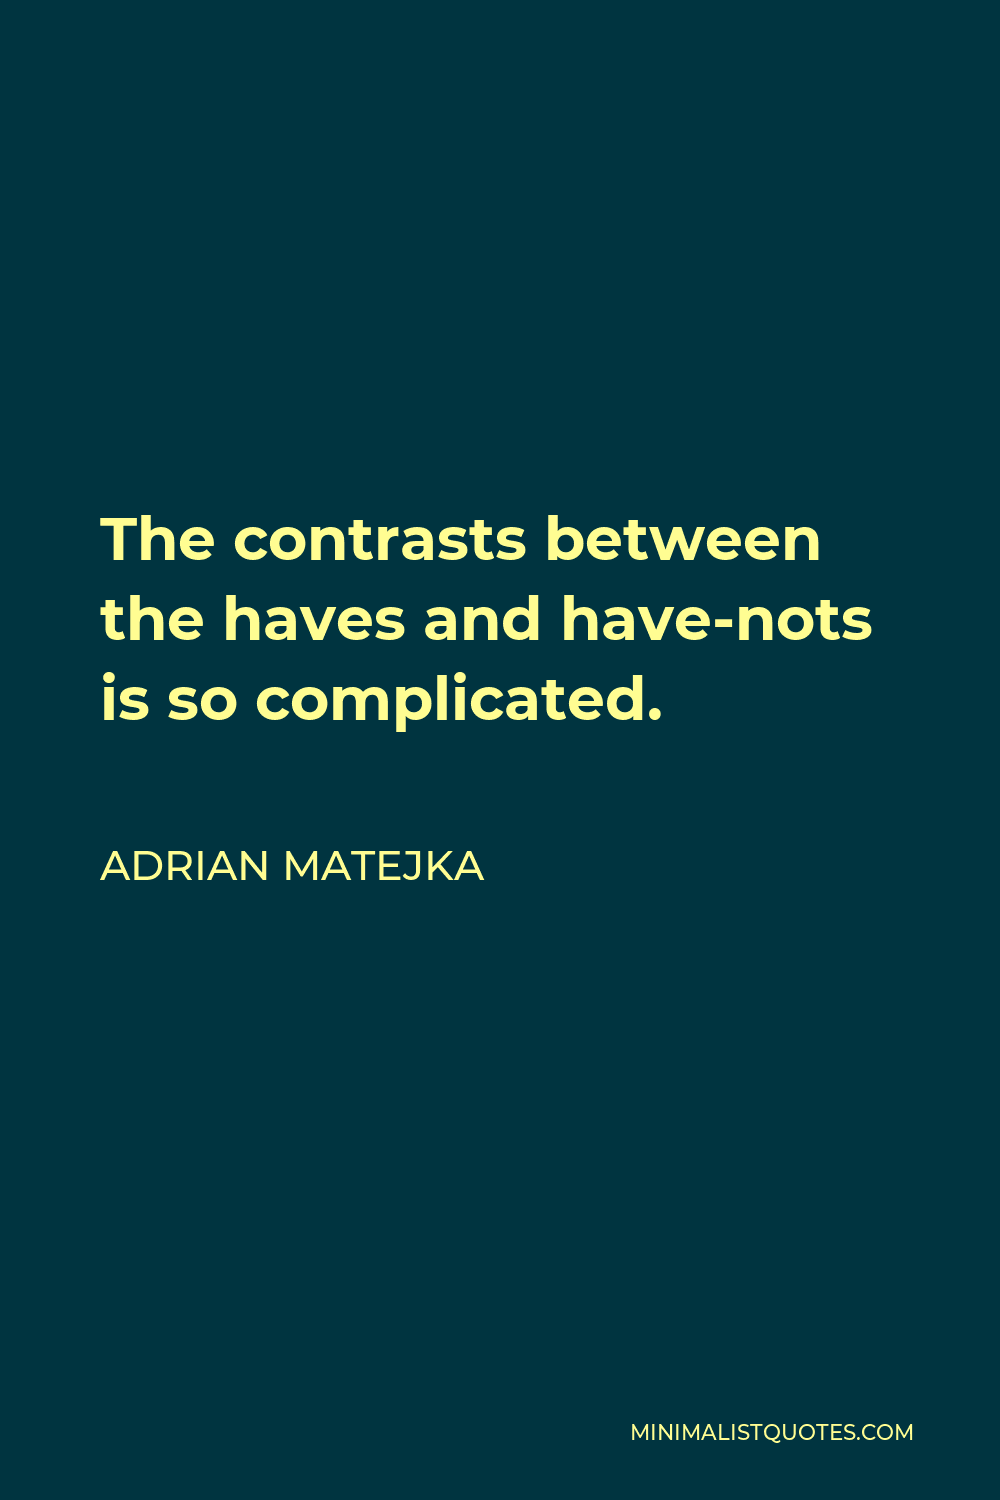 Adrian Matejka Quote - The contrasts between the haves and have-nots is so complicated.